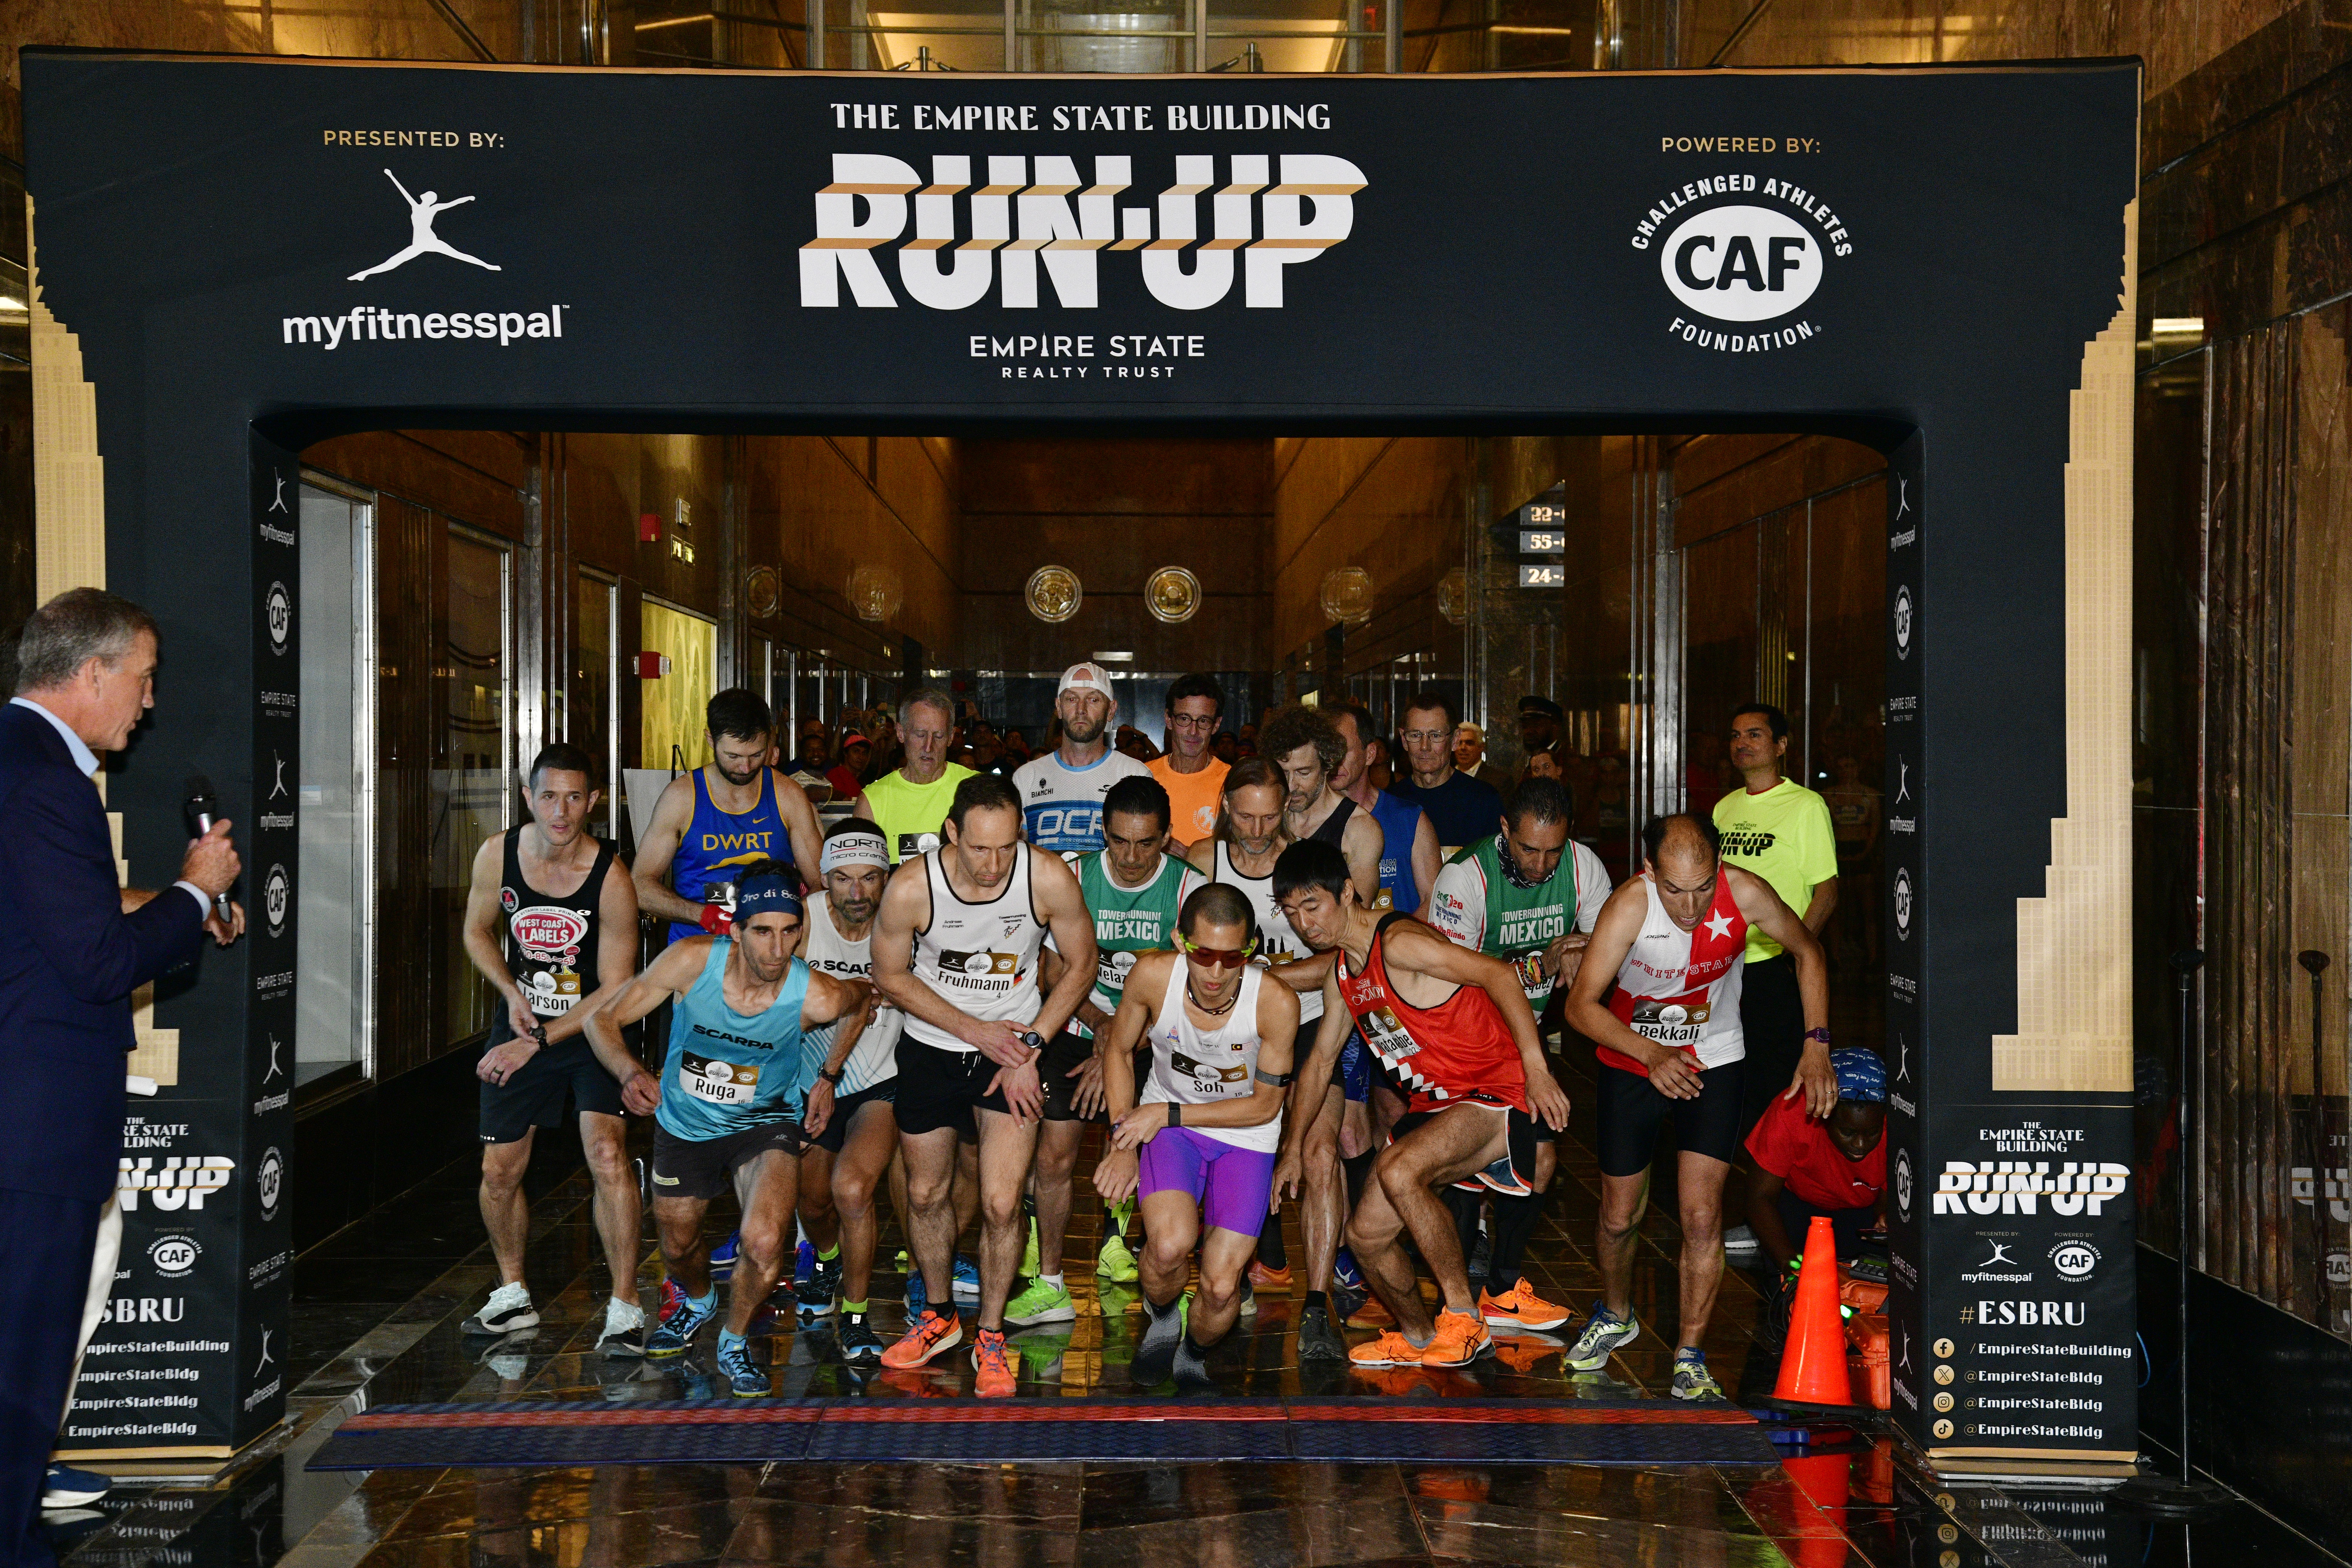 The starting line at the ESBRU